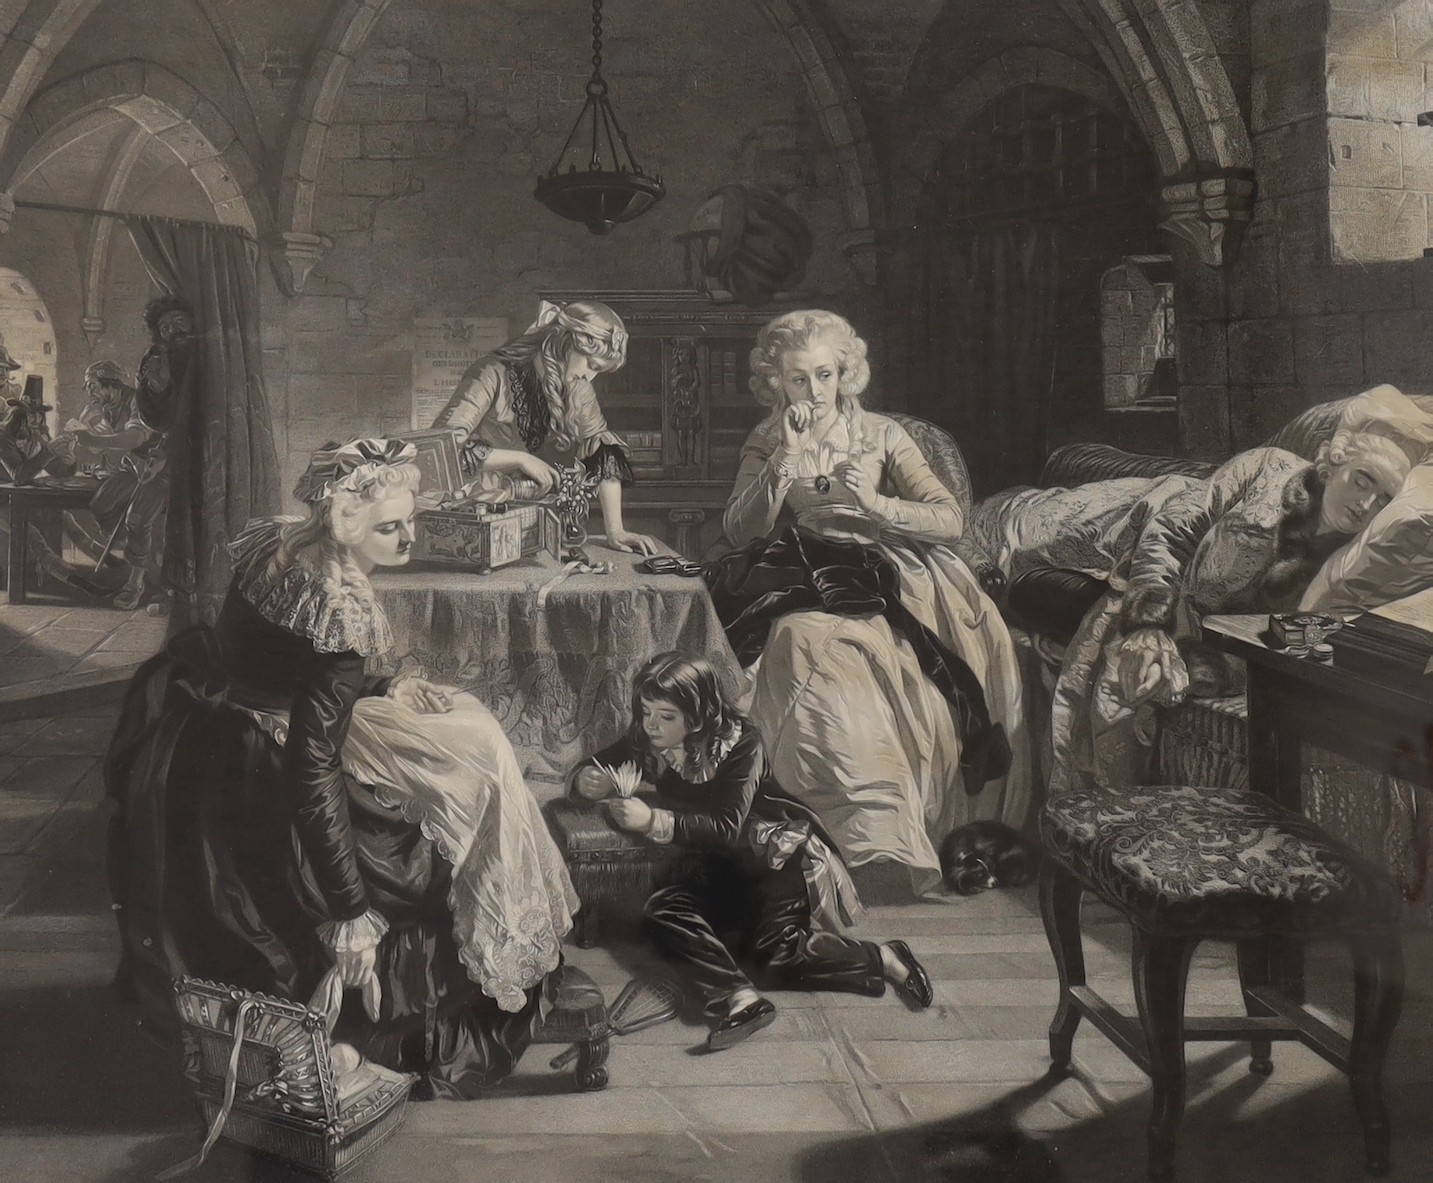 Couzens after Ward, mezzotint, 18th century romantic interior scene, 57 x 72cm and Burnet after Wilkie, engraving, 'Reading the news', 40 x 60cm